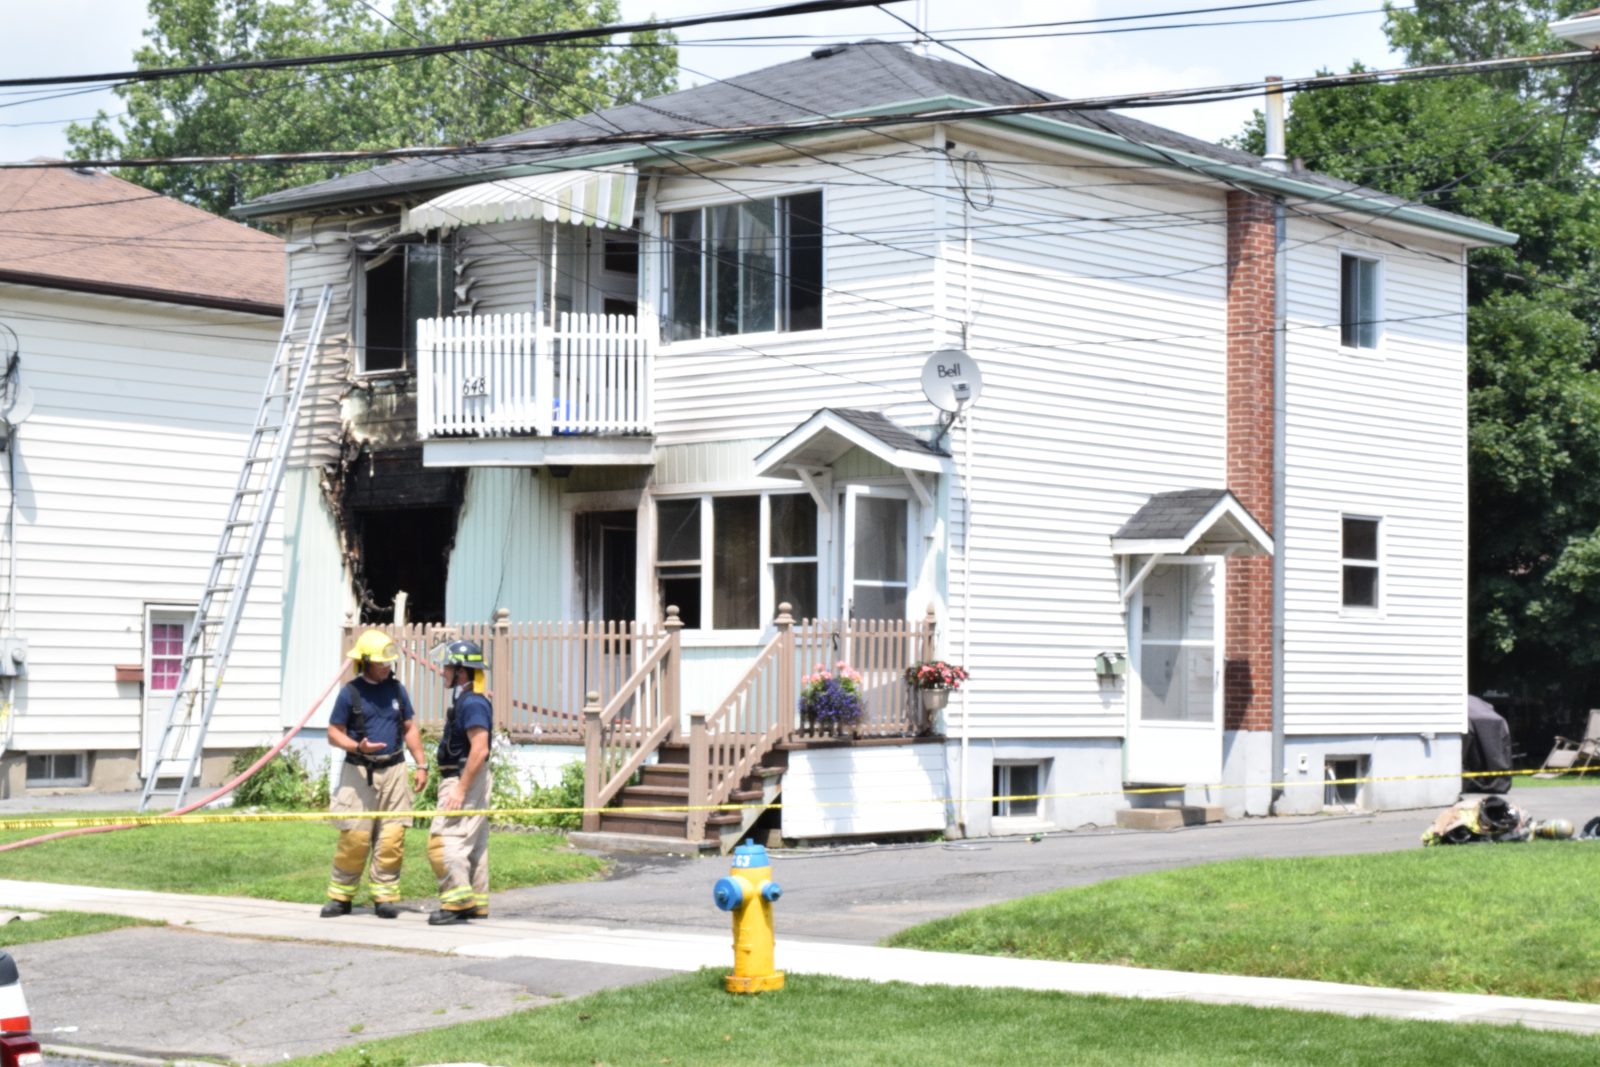 Residents displaced by St. Felix St. fire